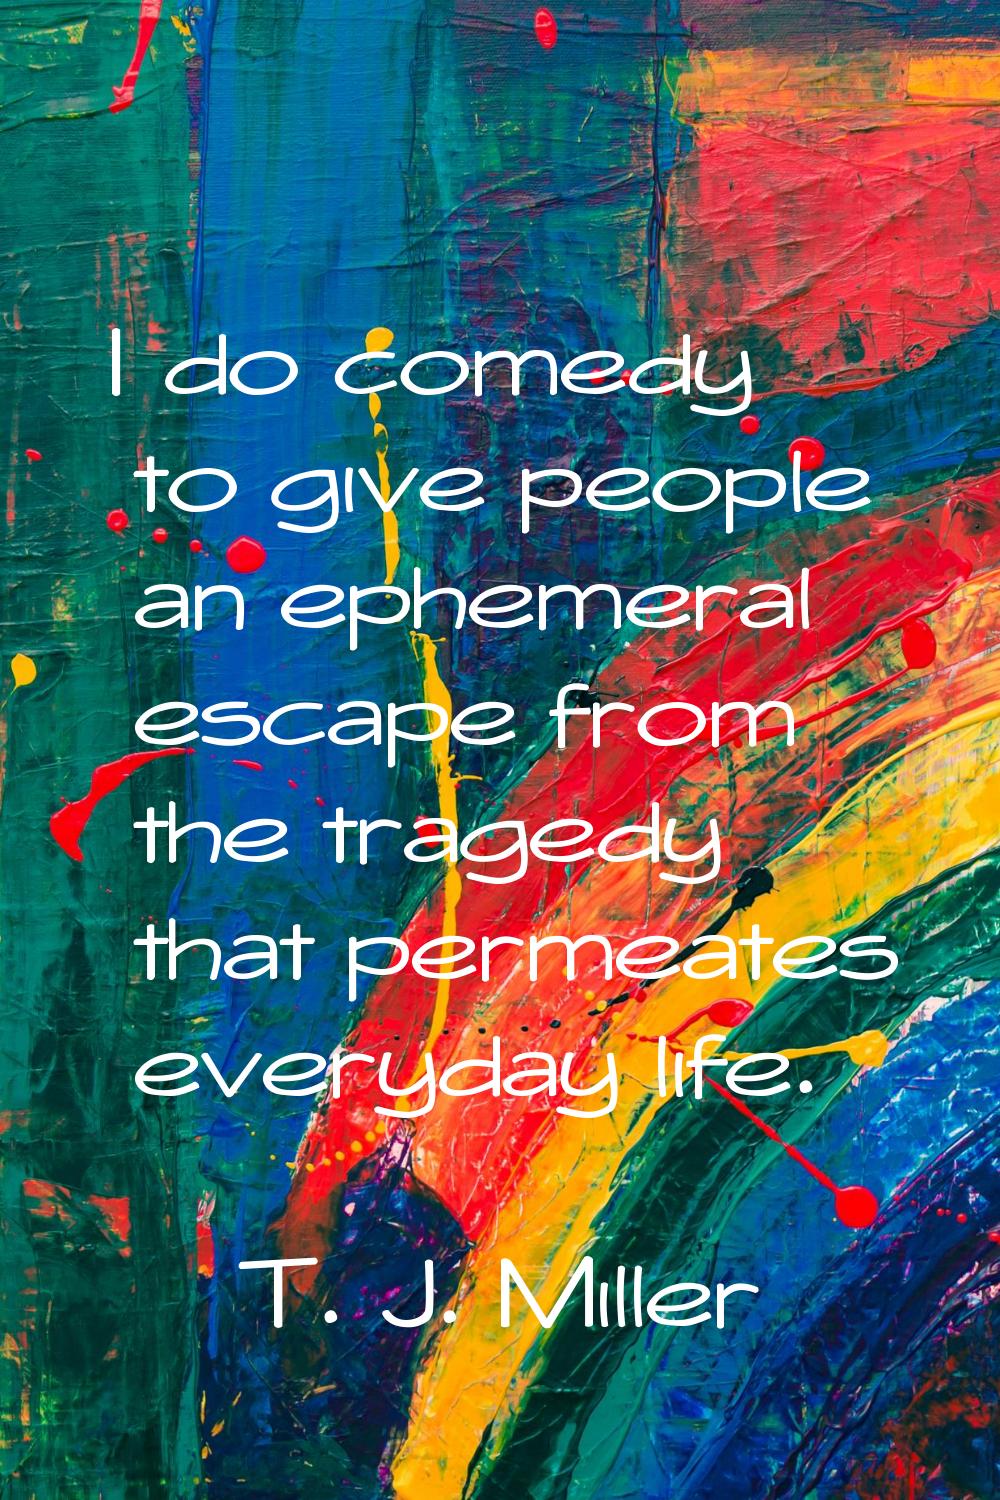 I do comedy to give people an ephemeral escape from the tragedy that permeates everyday life.